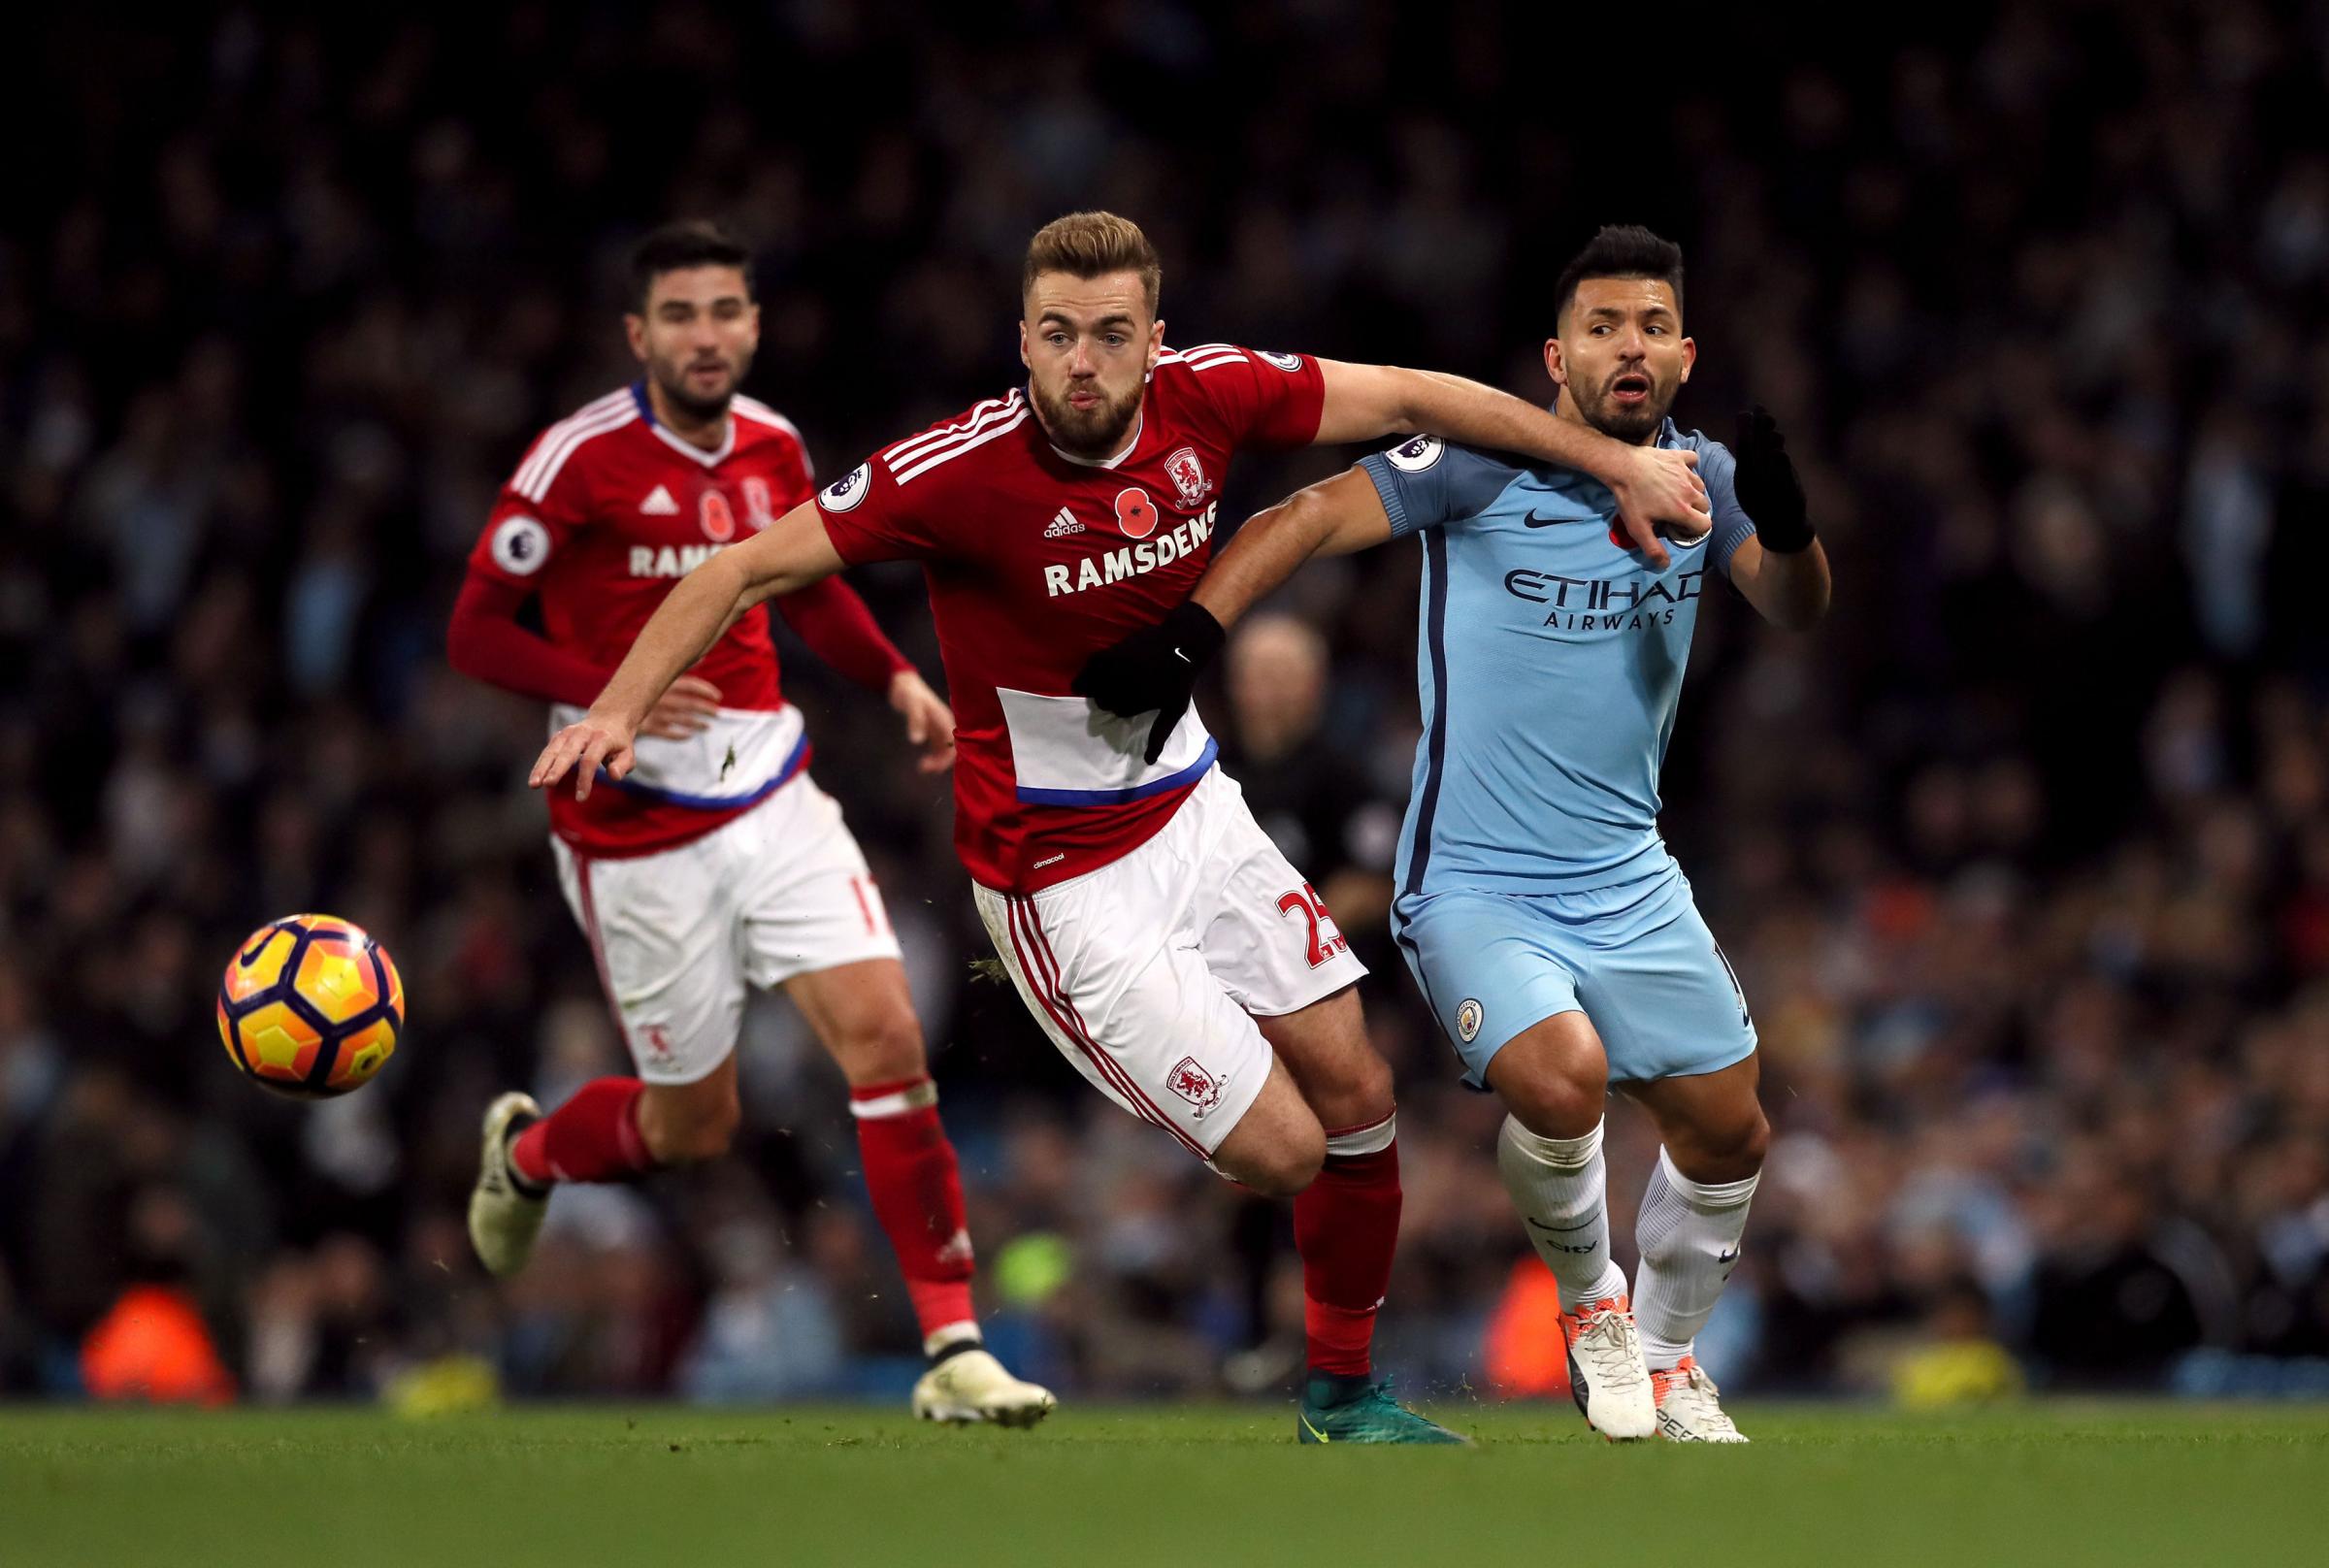 Calum Chambers praises Middlesbrough ahead of European semi-final appearance with England Under-21s